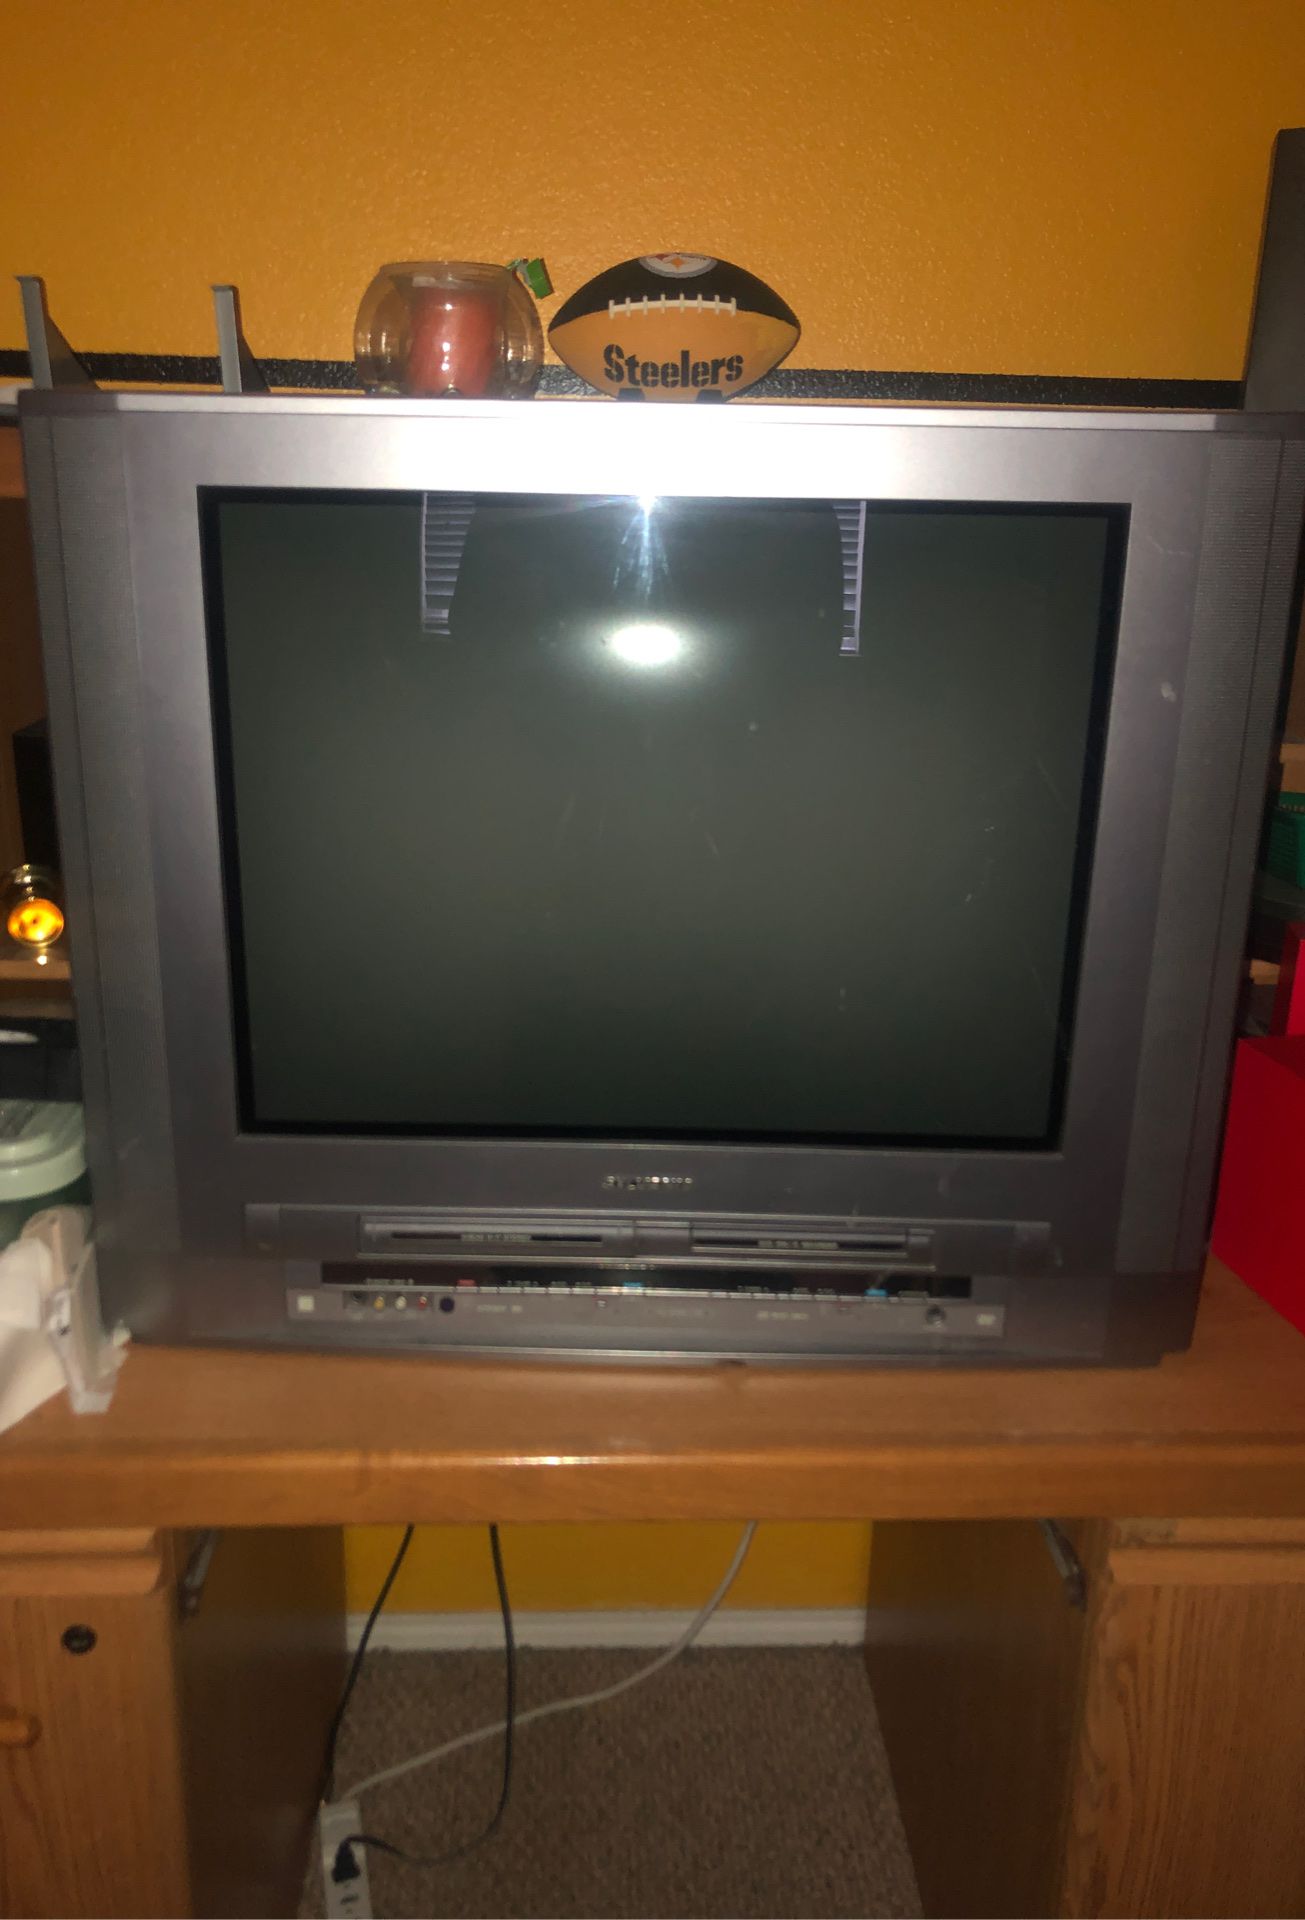 Sylvania TV with built in VCR and DVD player